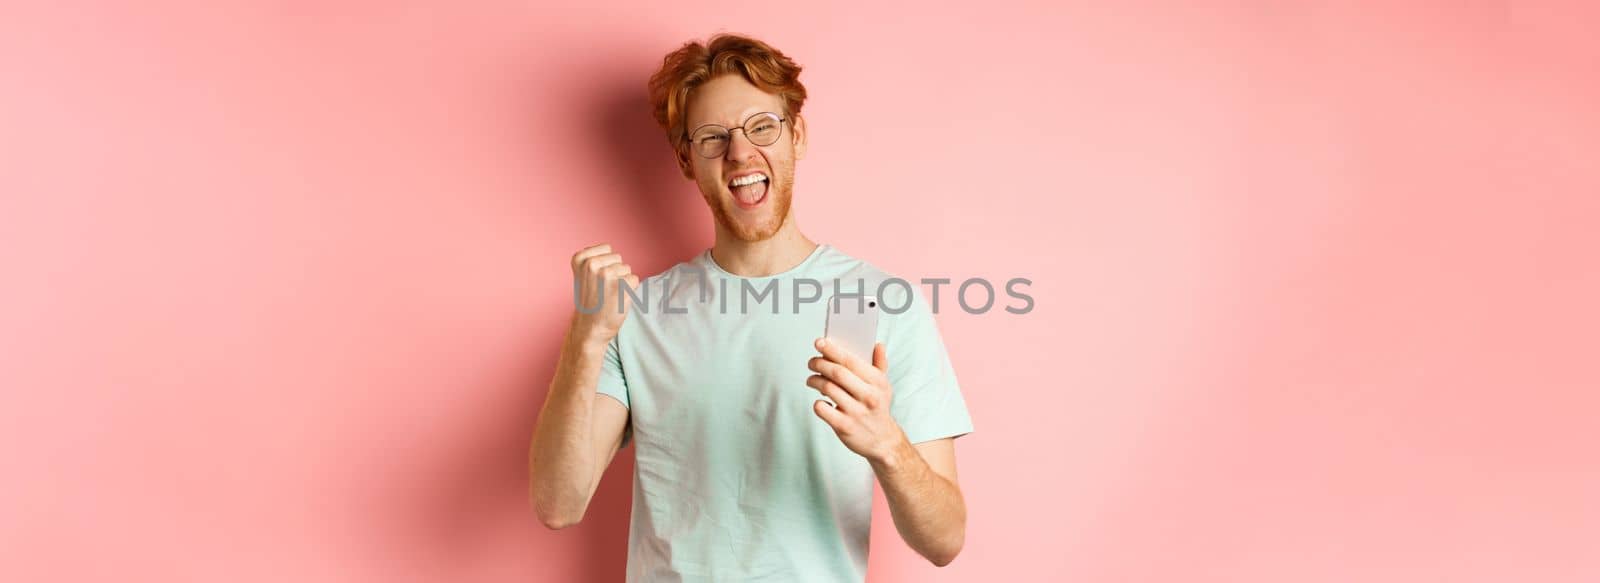 Happy redhead guy in glasses and t-shirt winning online prize, shouting yes with joy and satisfaction, holding smartphone and making fist pump, pink background.